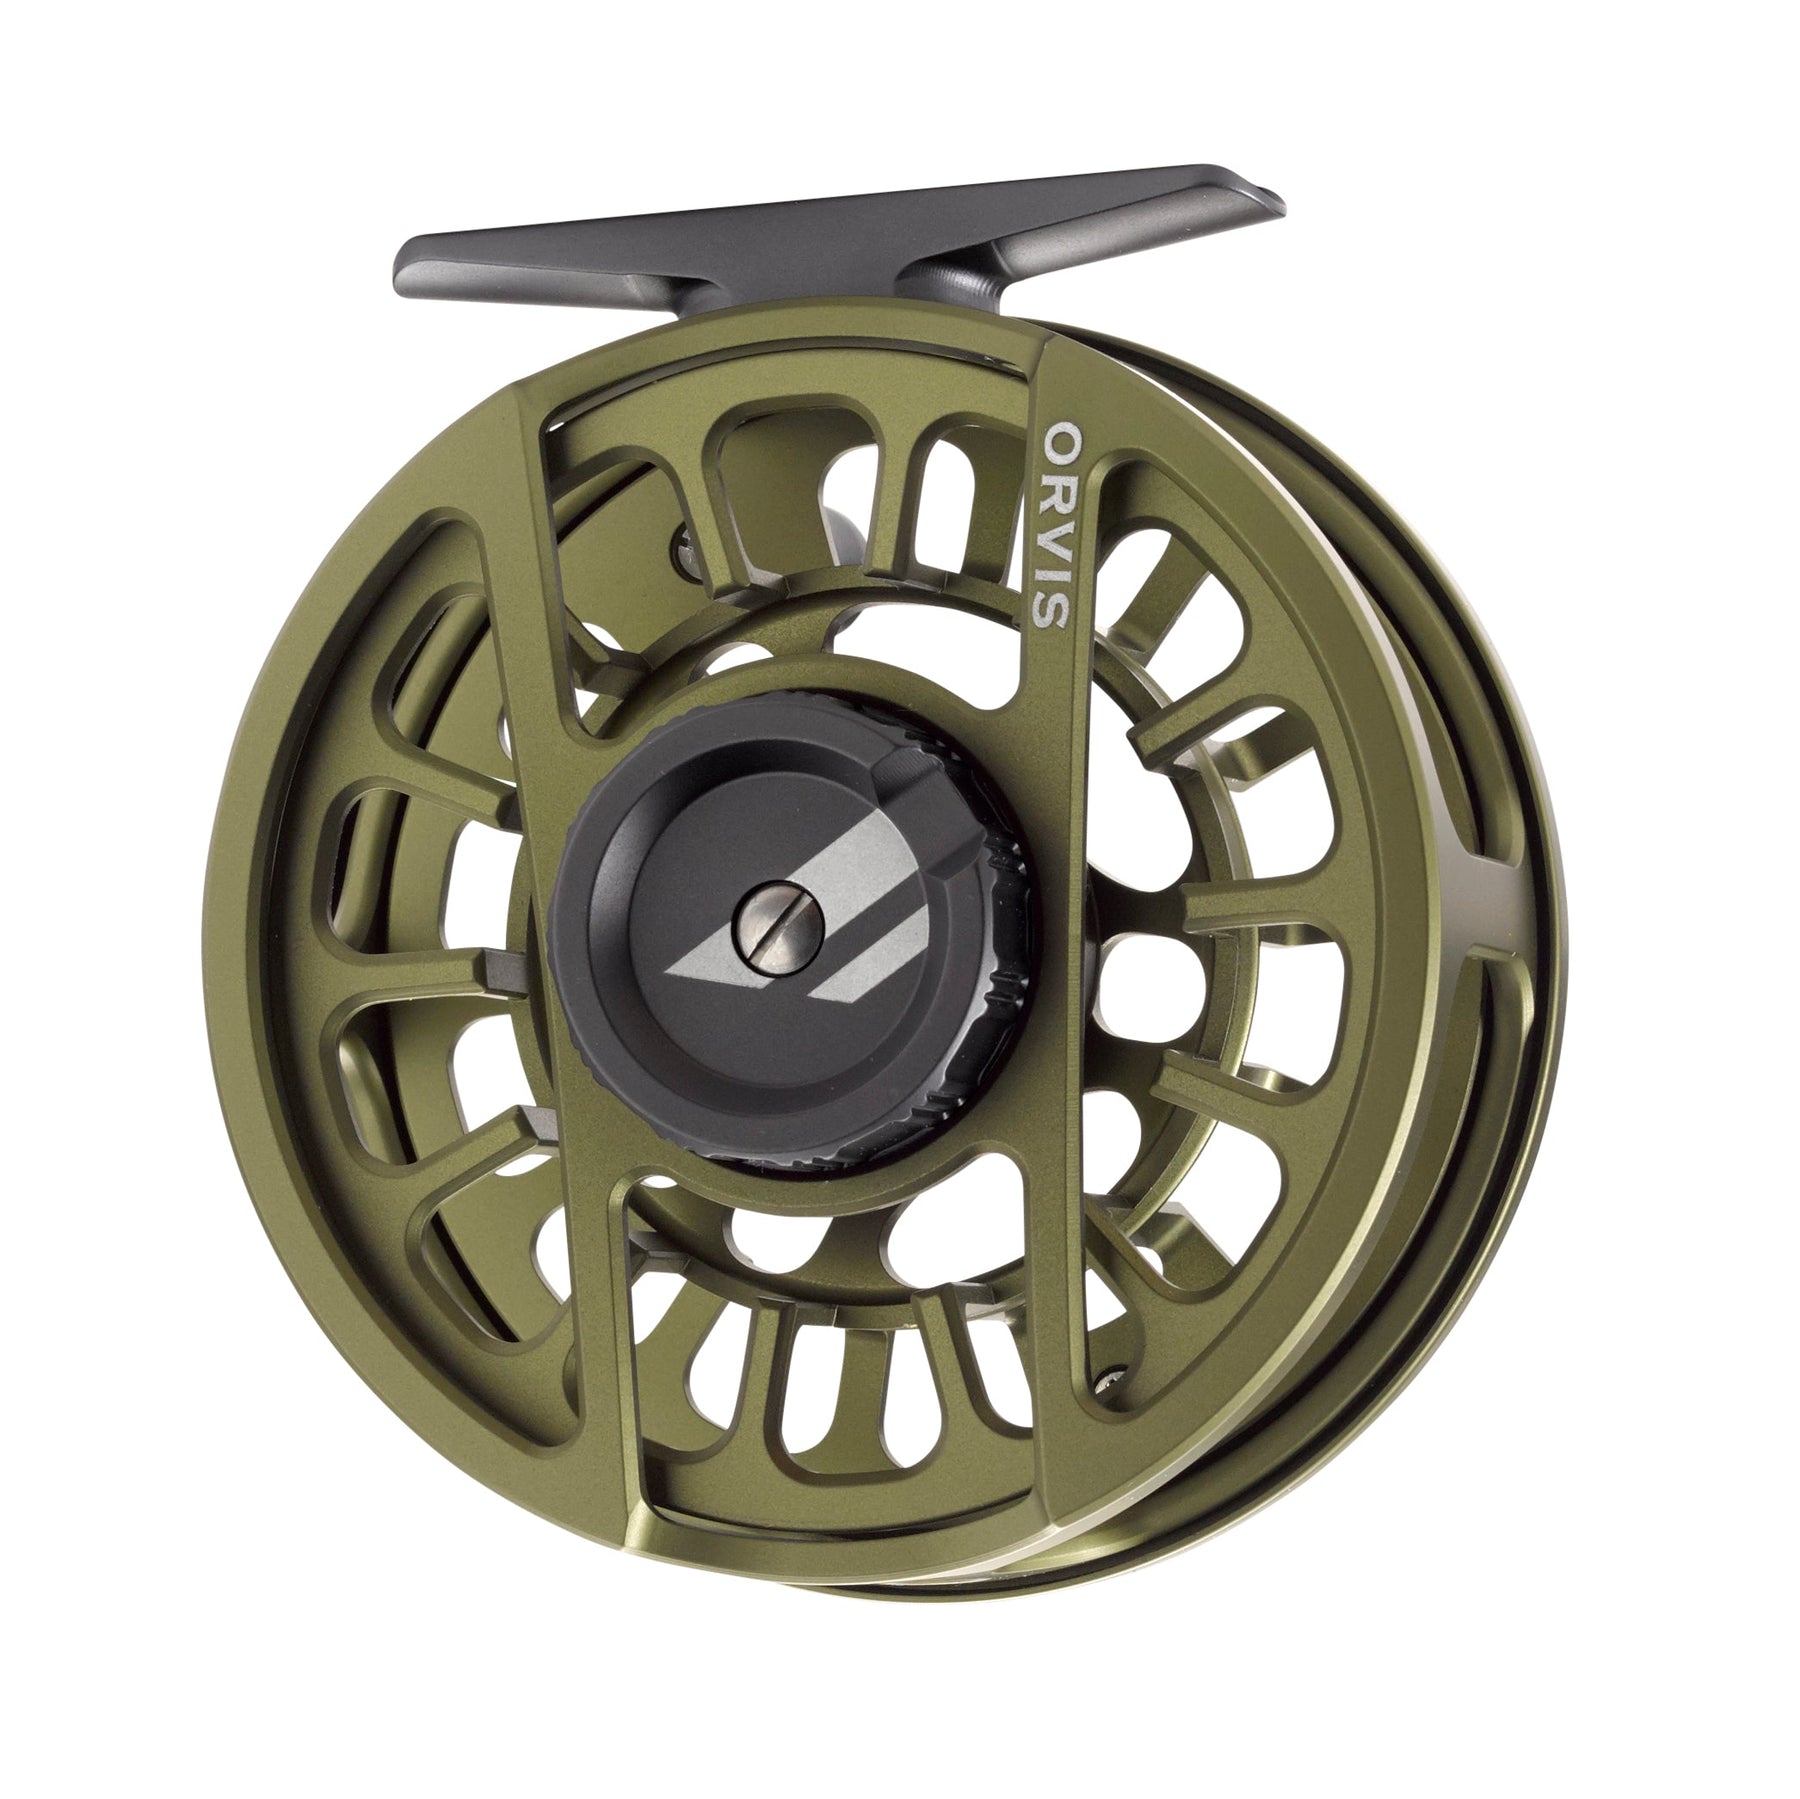 Orvis SSS 7-8 Direct Drive fly reel